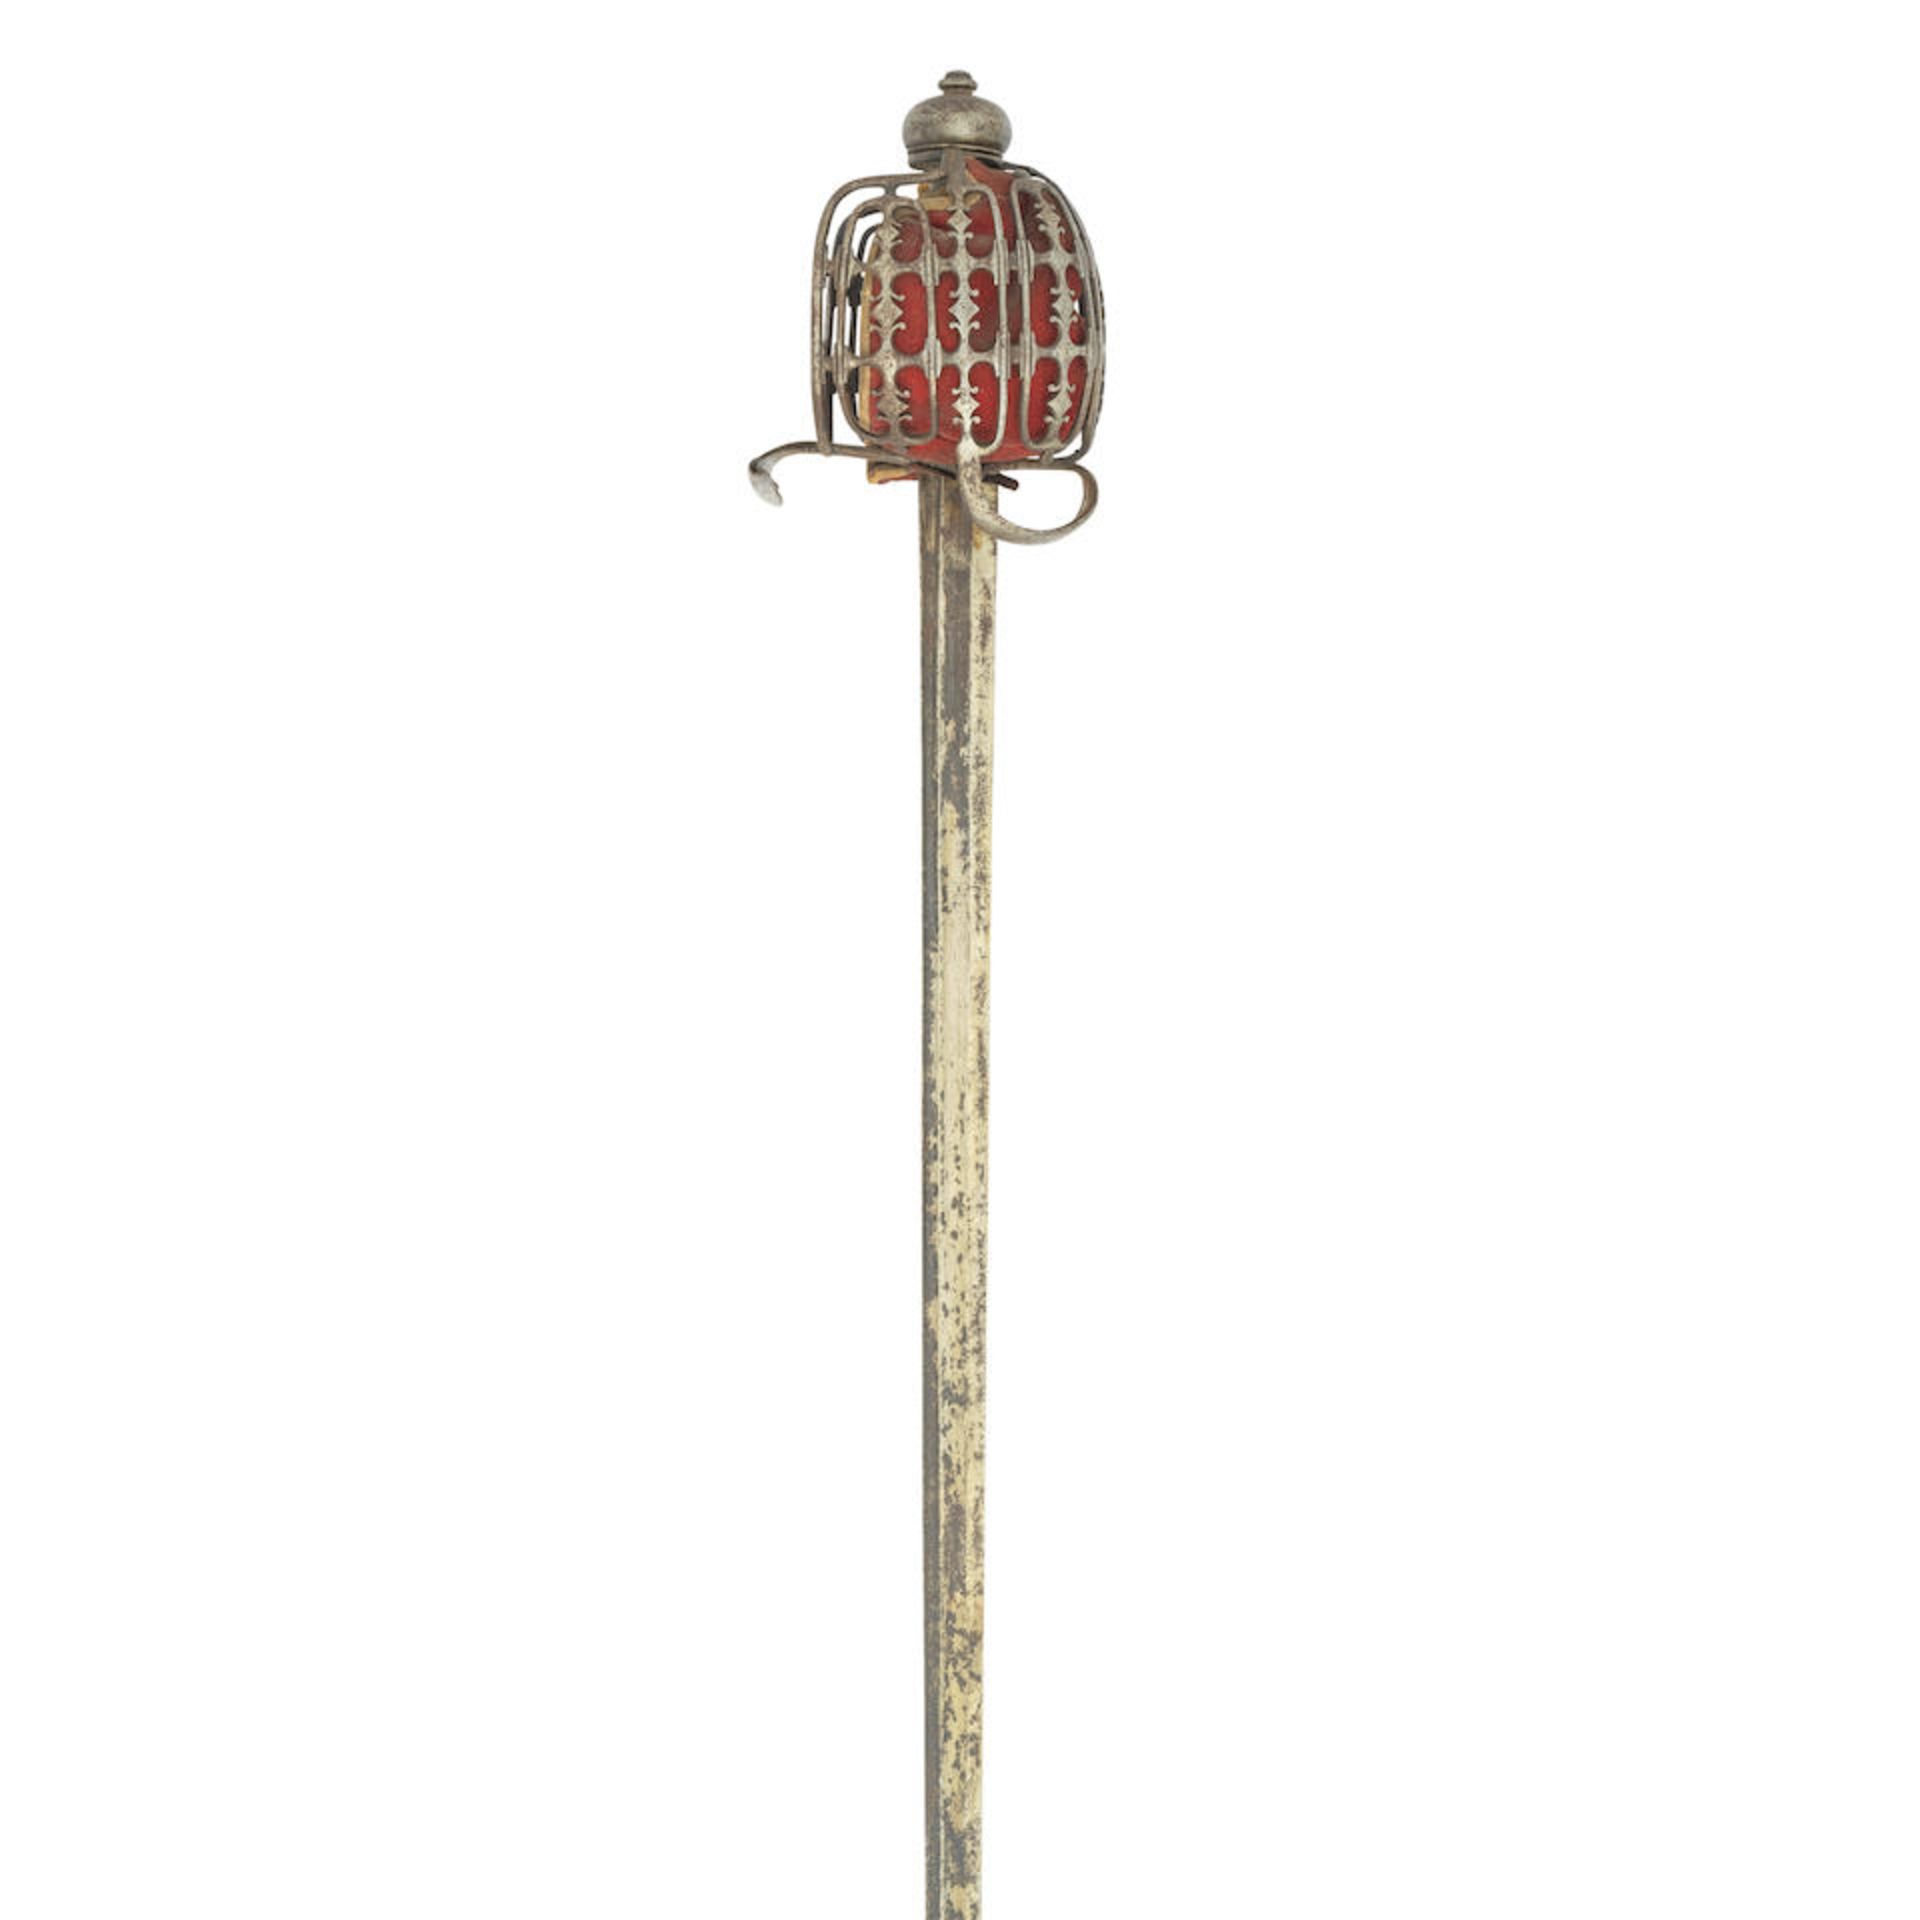 A Fine Military Officer's Basket-Hilted Backsword Of So-Called 'Pinch Of Snuff' Type